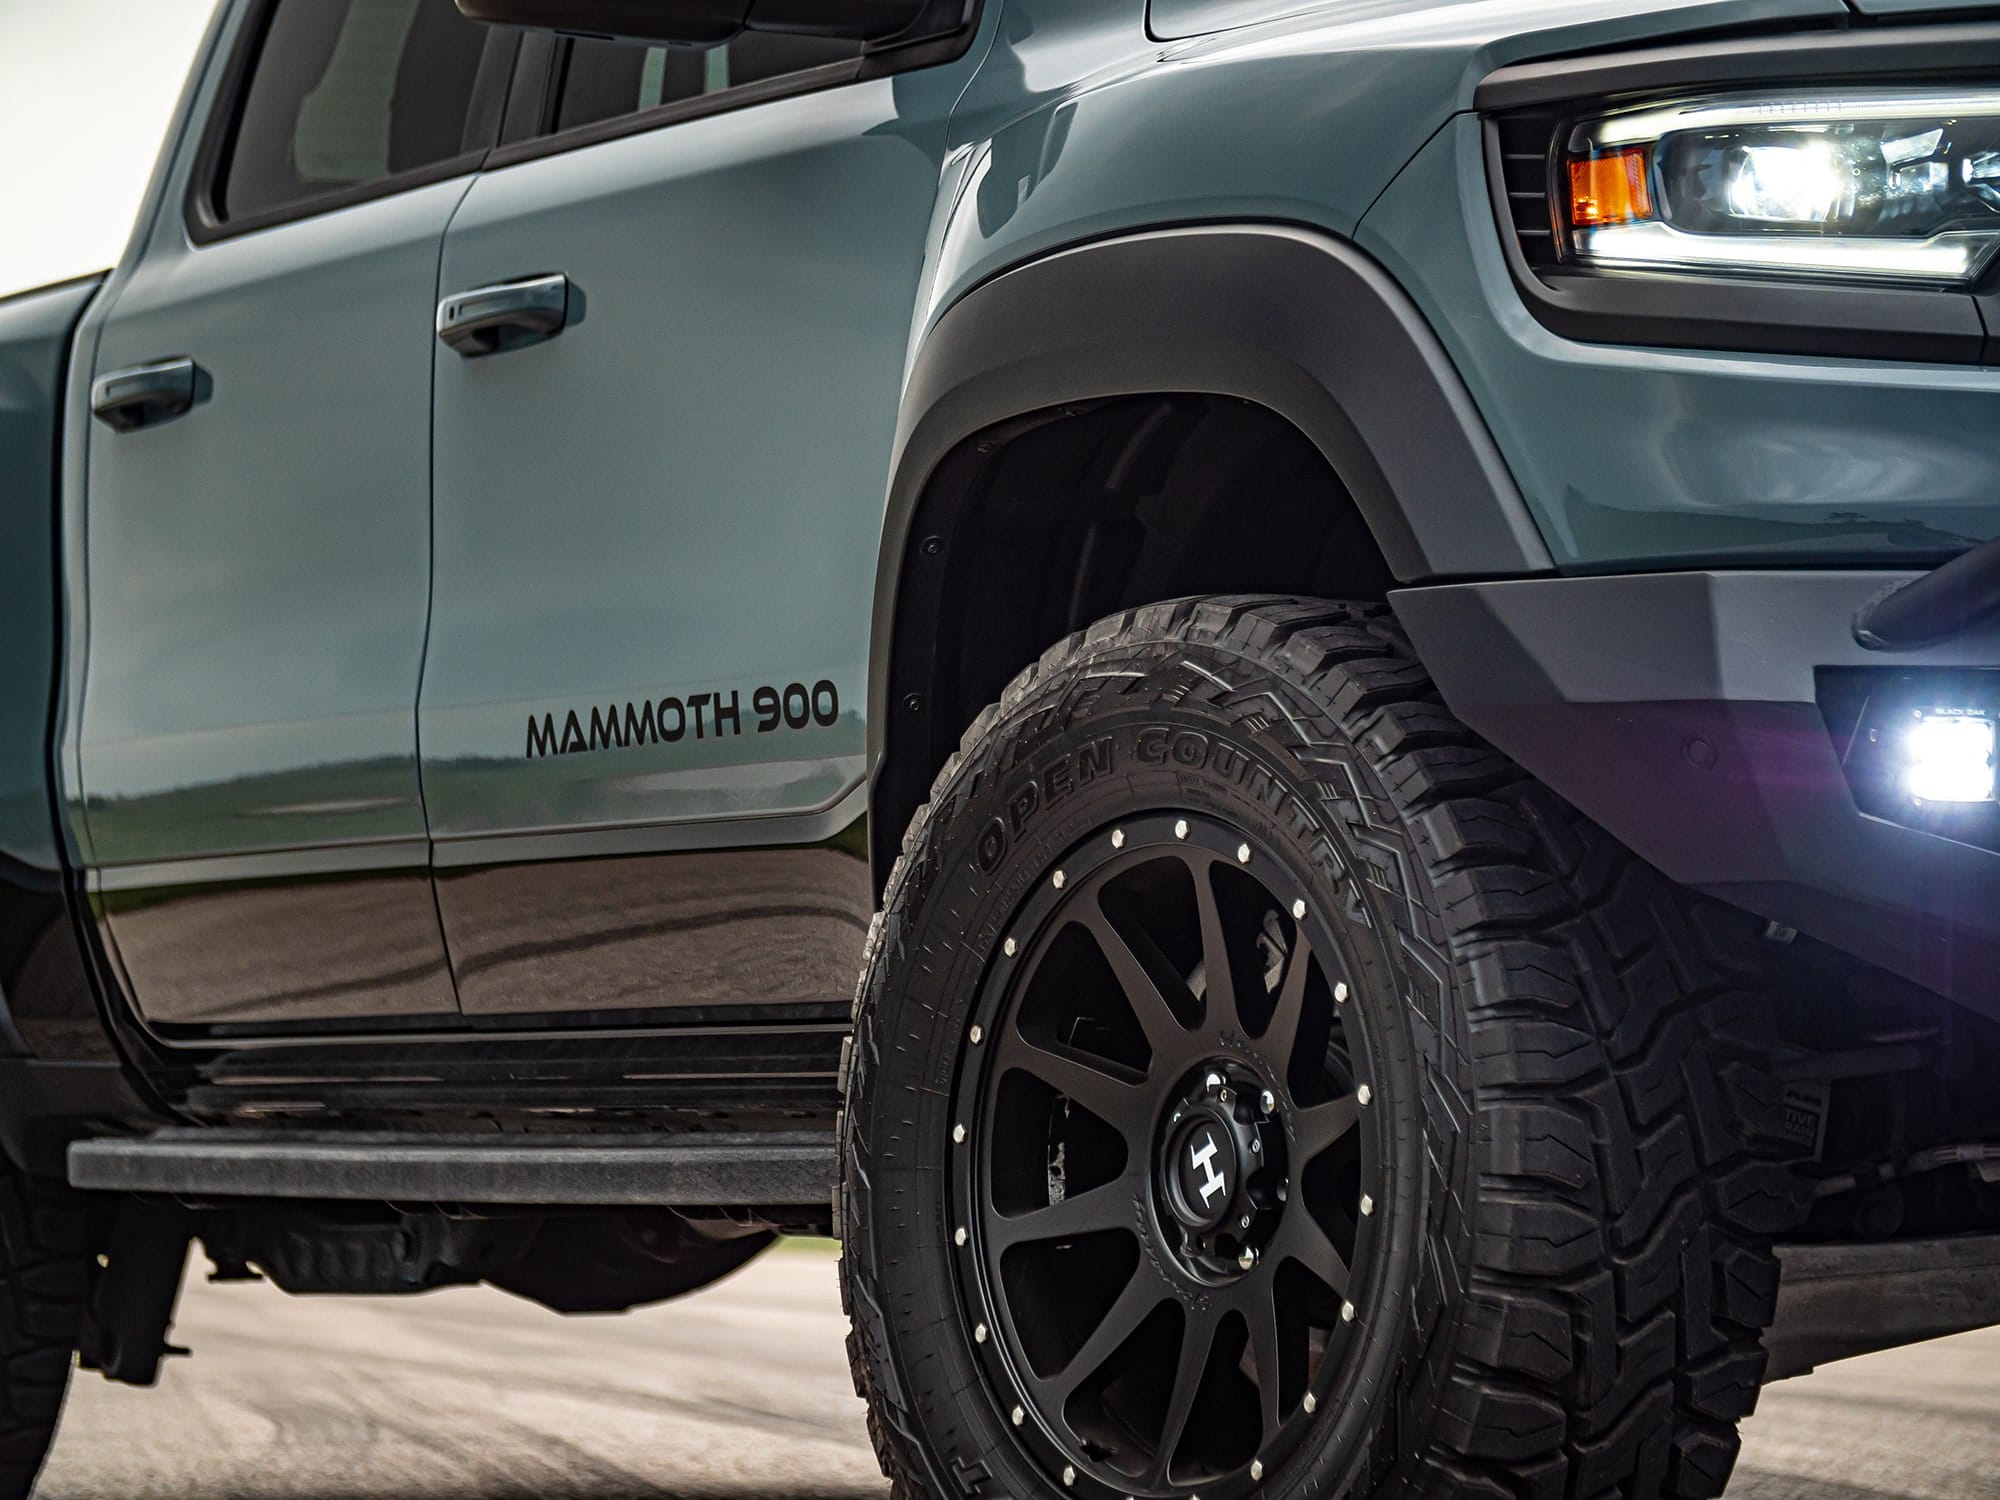 The MAMMOTH OFF-ROAD STAGE 2 37 inch tires. Source: http://hennesseyperformance.com/vehicles/dodge/ram-1500-trx/